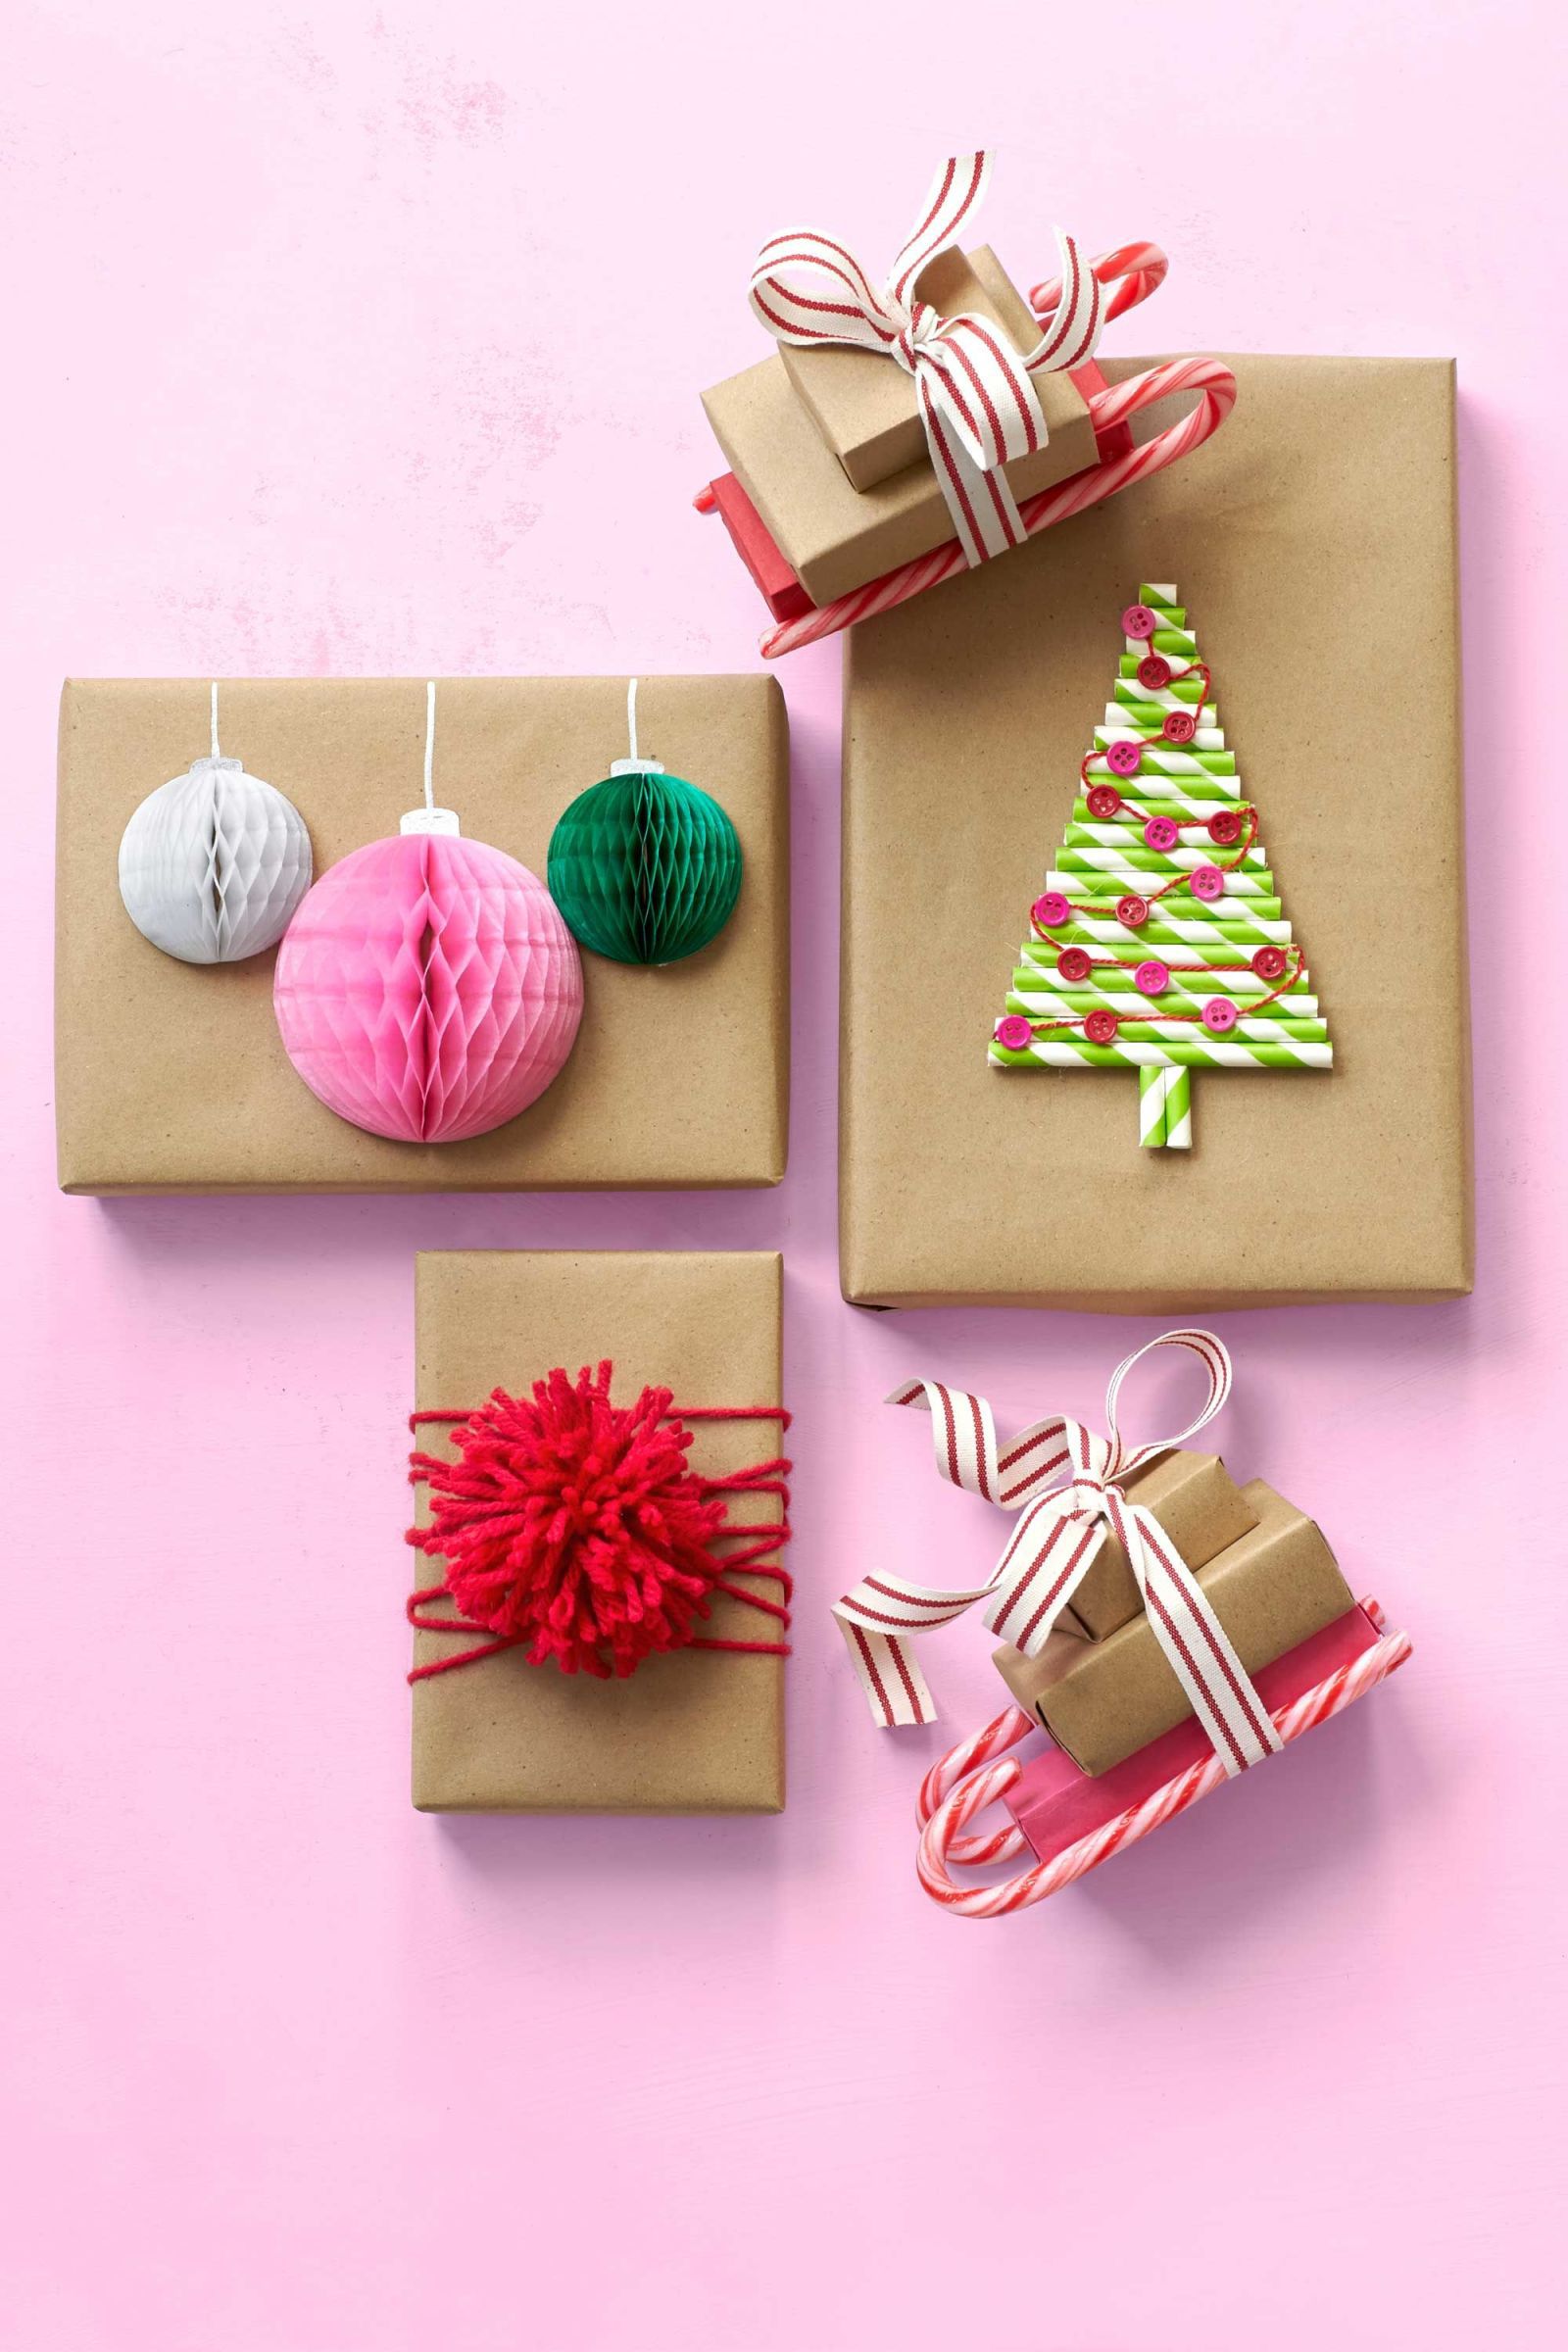 35 Unique Christmas Gift Wrapping Ideas - DIY Holiday Gift Wrap